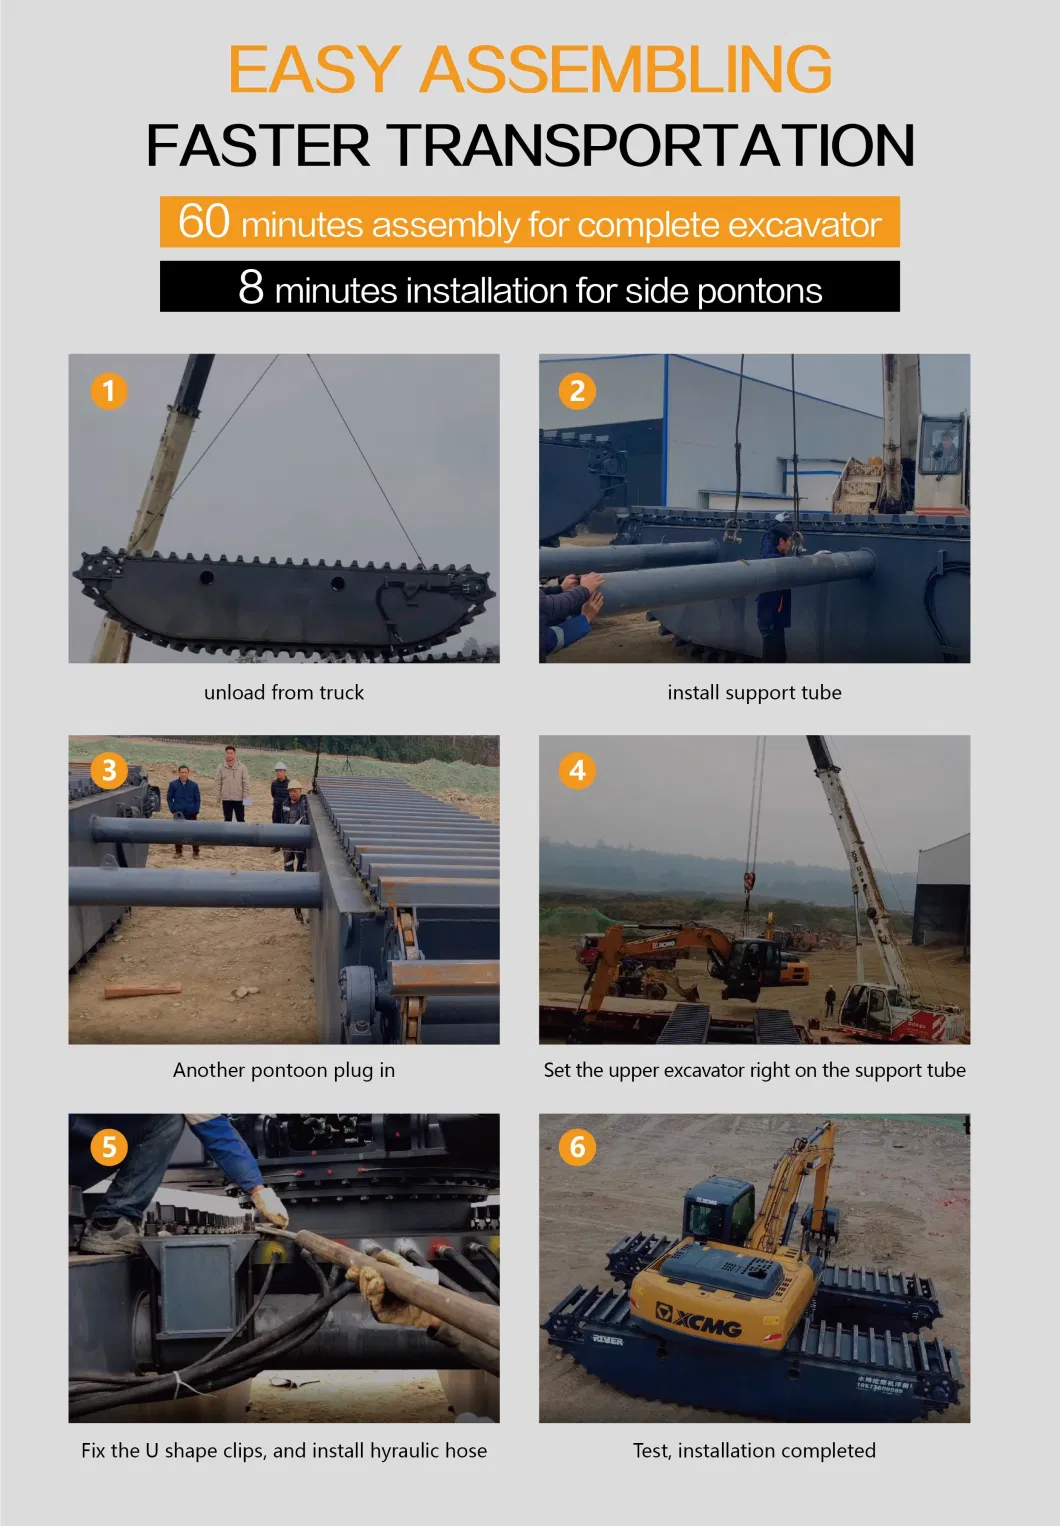 Dredging, Demolition, Construction, Photovoltaic, Shallow Waters Swamp Buggy Floating Marsh Excavators with Hydraulic Amphibious Side Pontoons